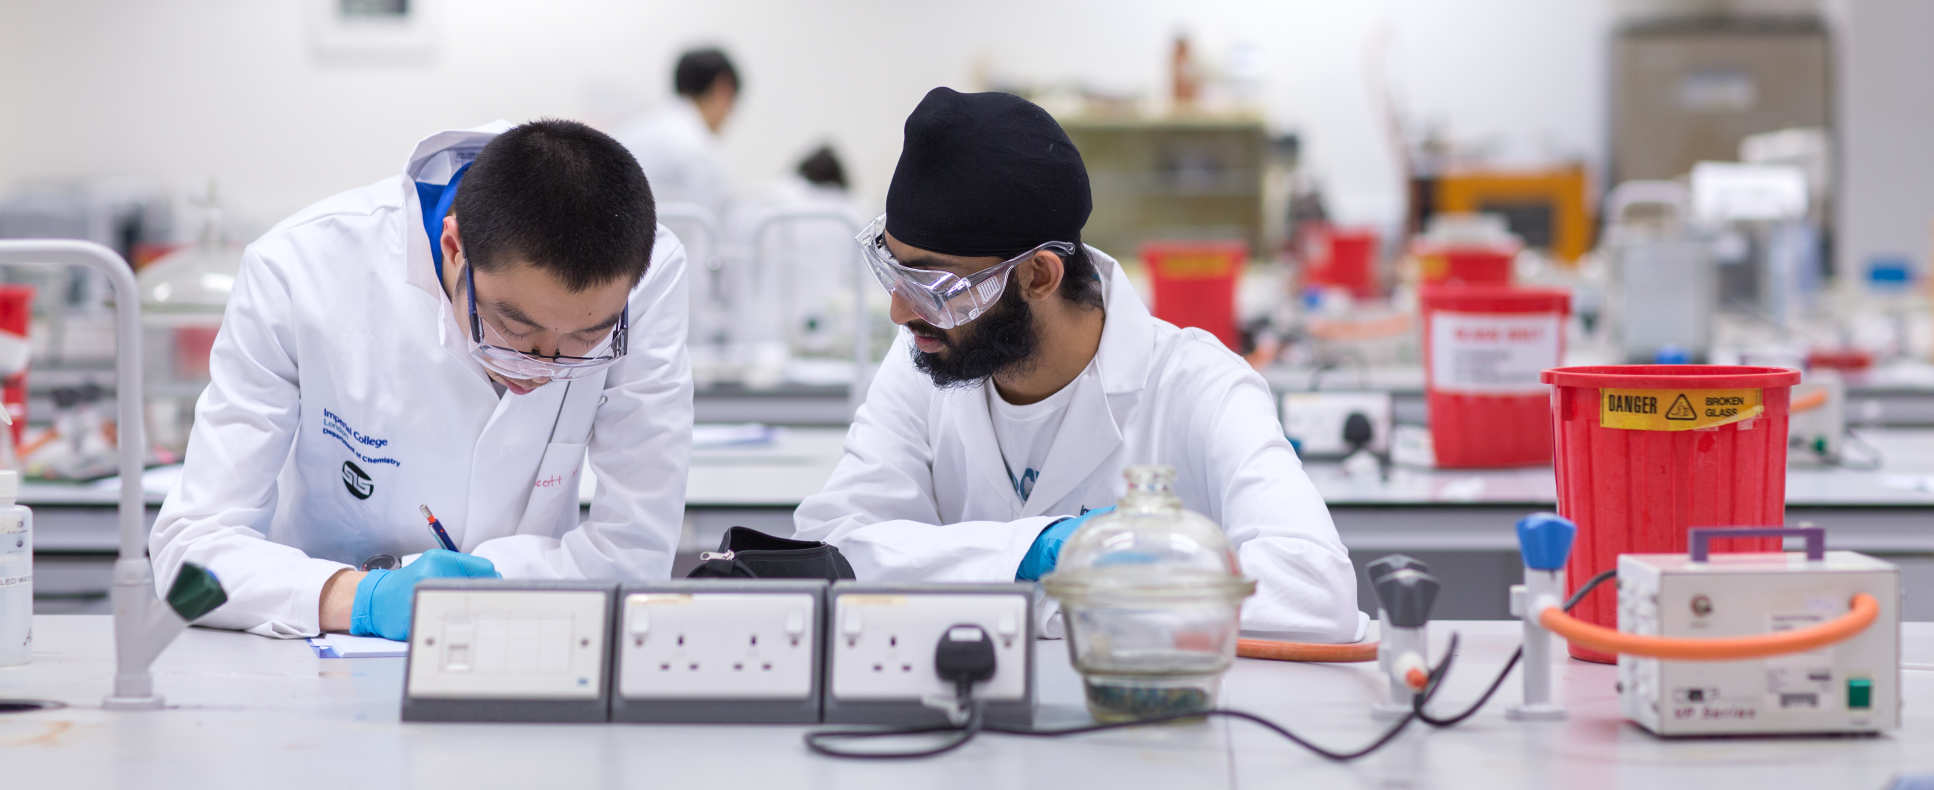 Students working together in a lab